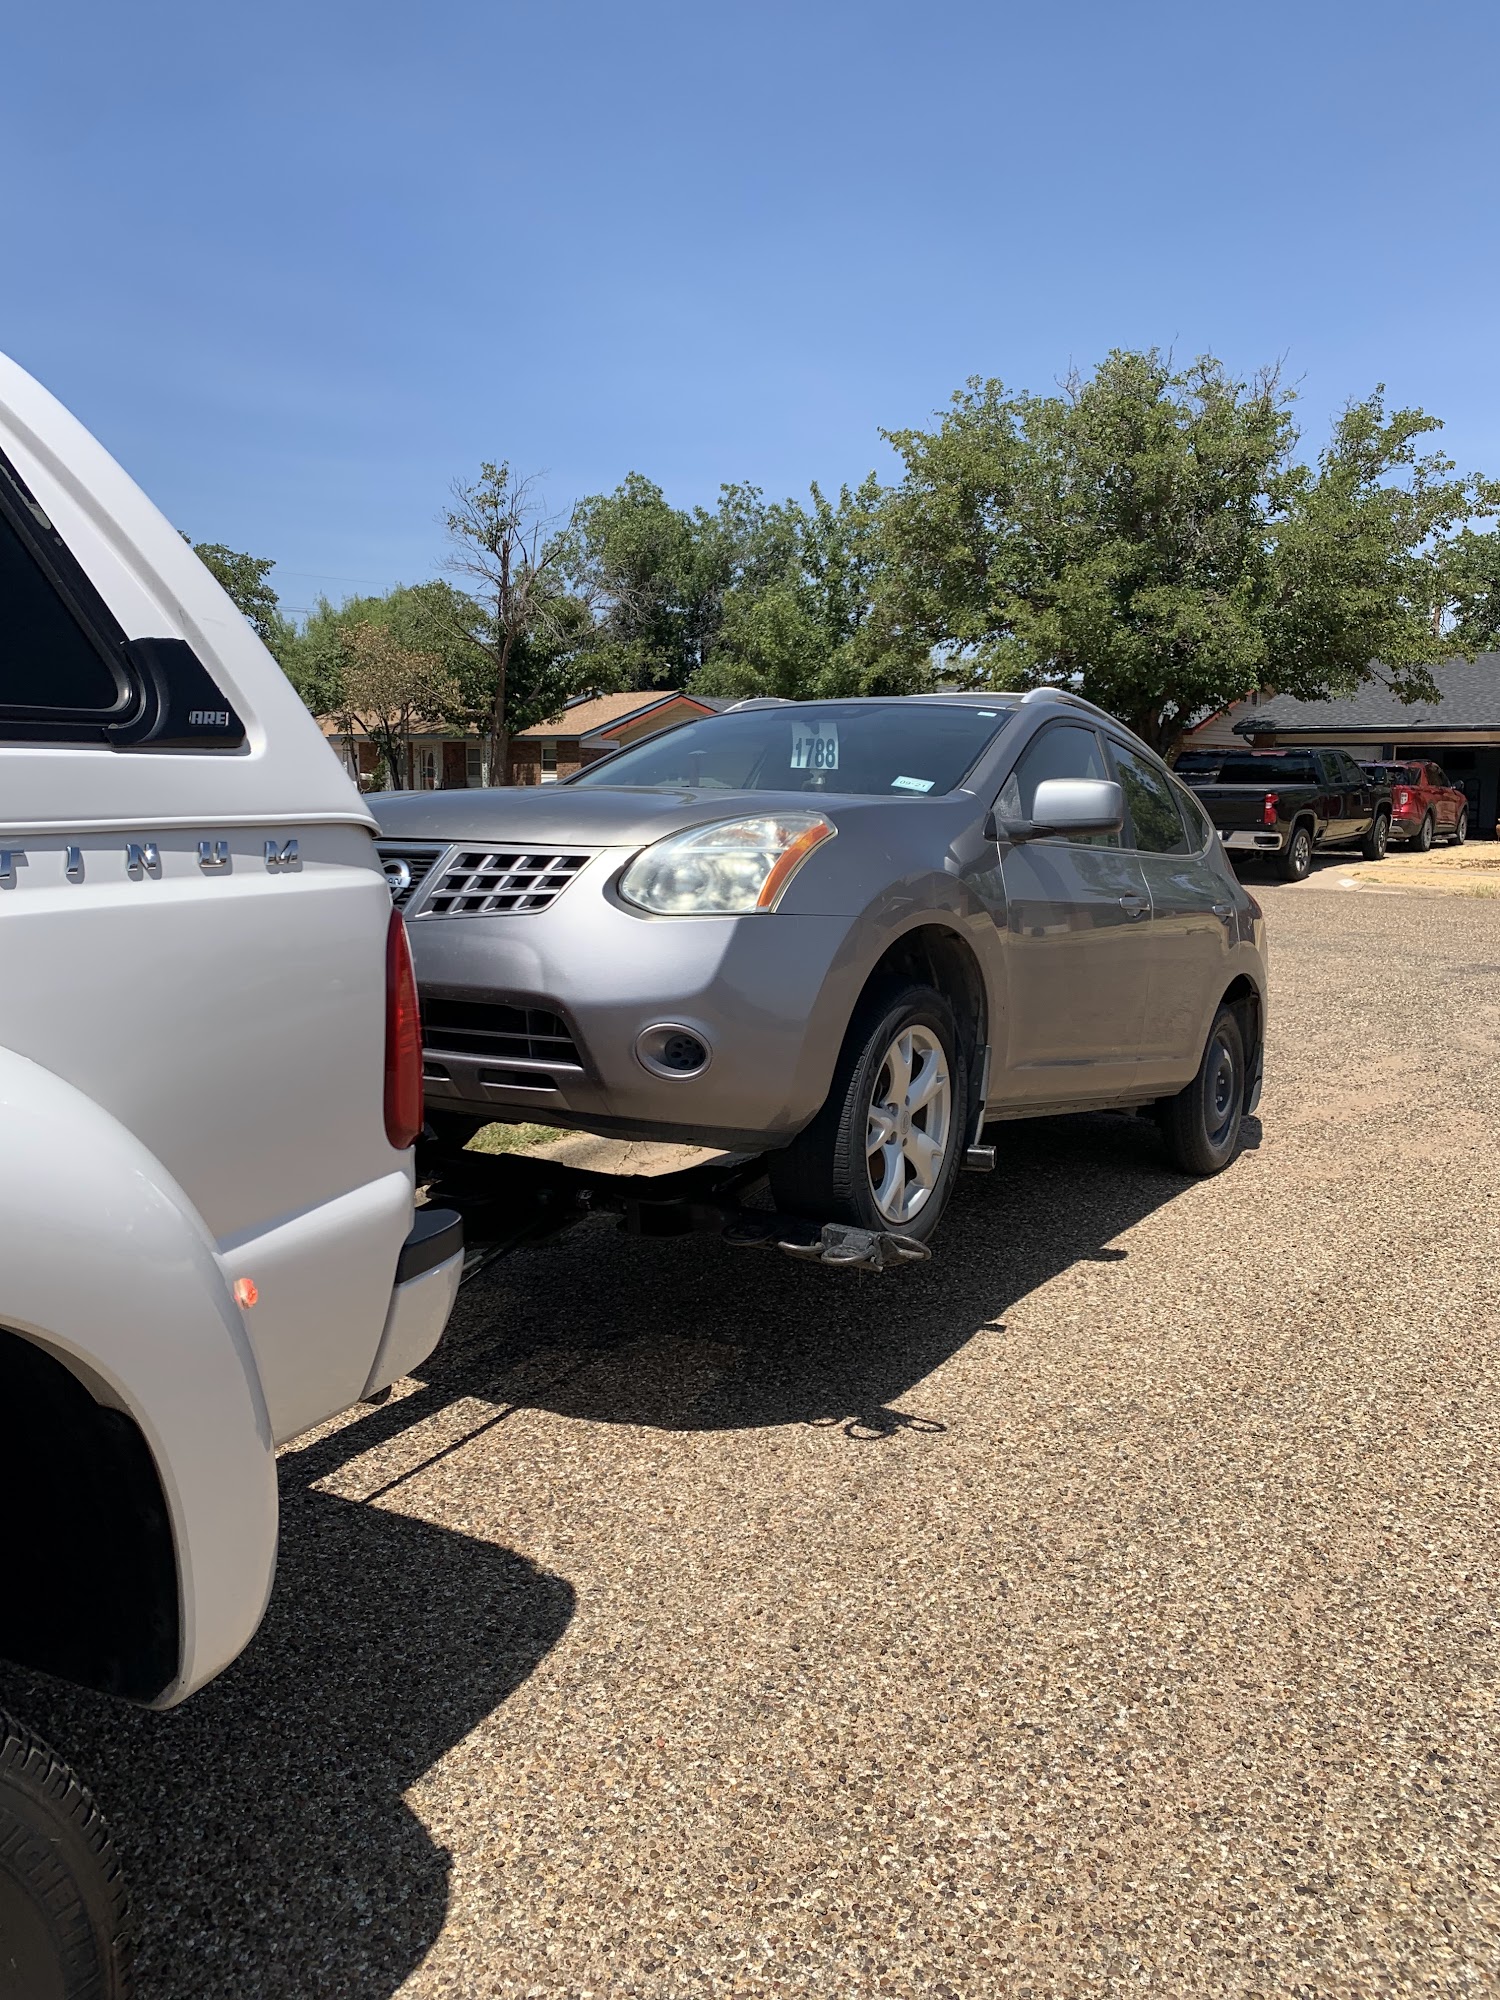 Cheap Tow in Lubbock Texas